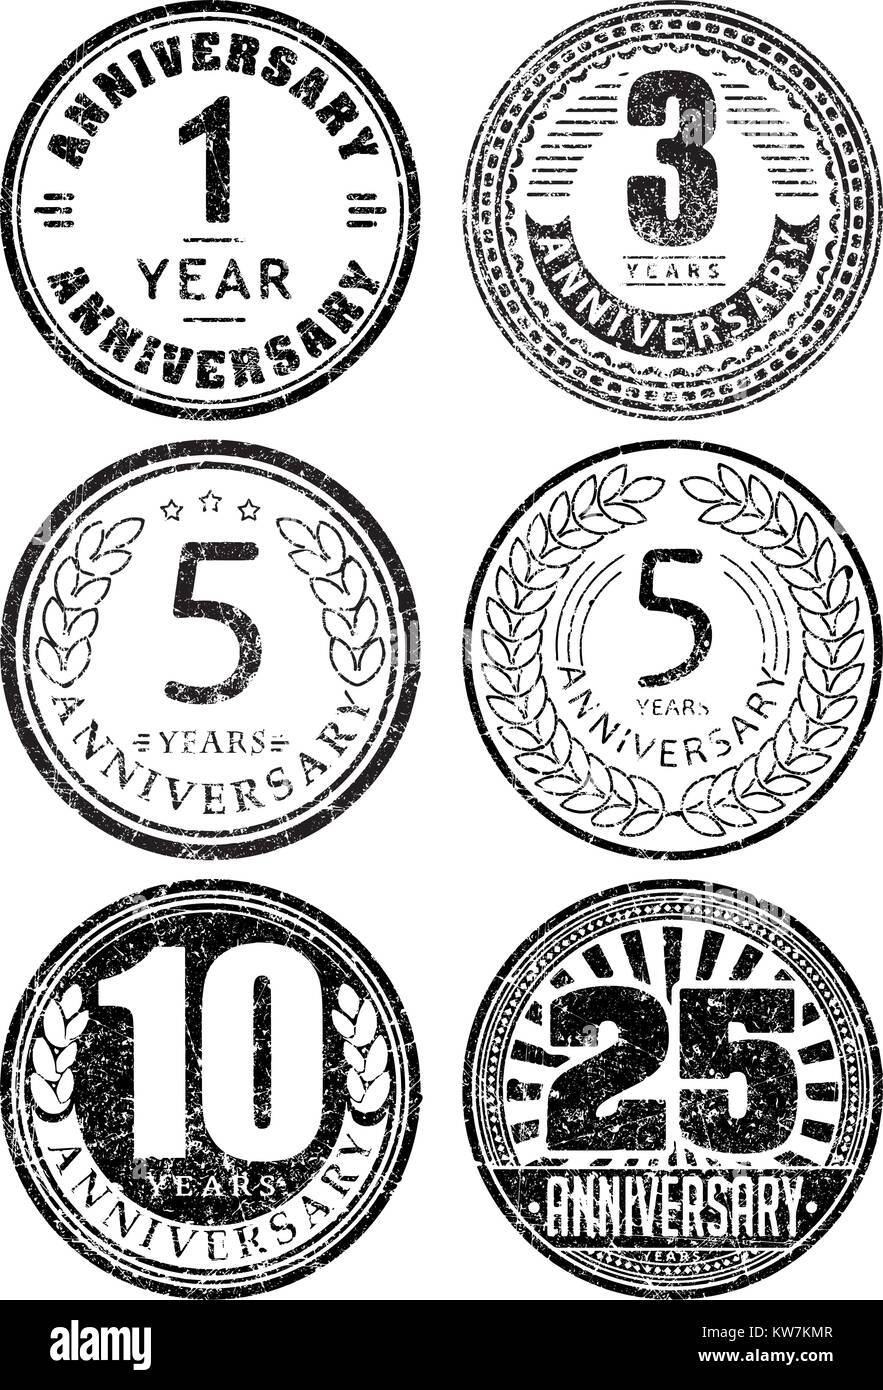 Set of six anniversary designs in rubber stamp style. There are 1, 3, 5, 10, 25 years icons. Stock Vector